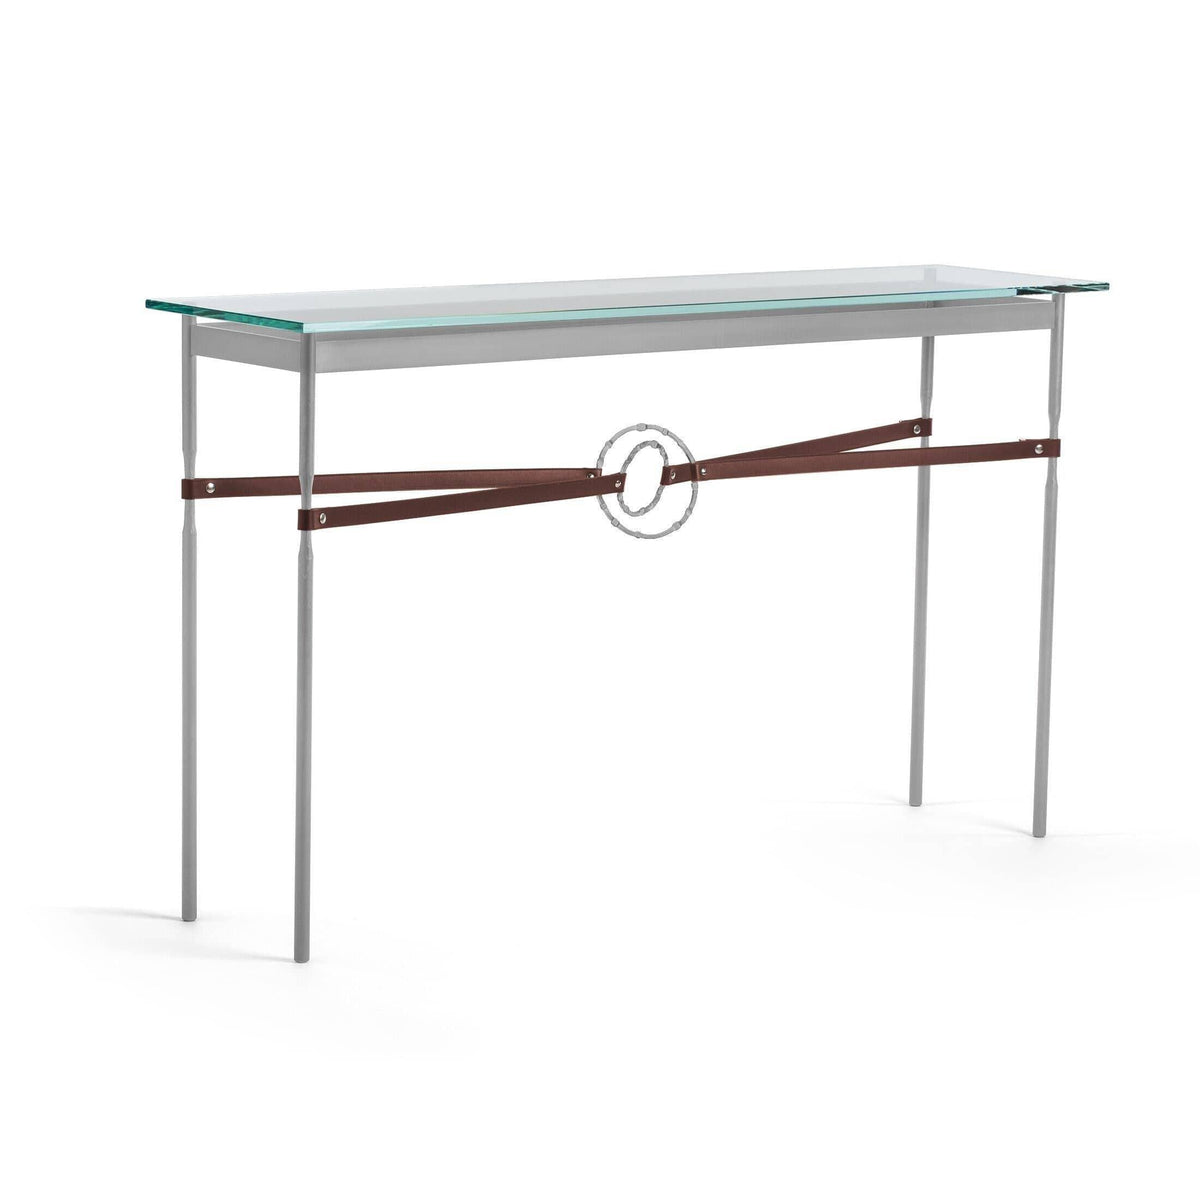 Hubbardton Forge - Equus Brown Leather Console Table - 750118-82-82-LB-VA0714 | Montreal Lighting & Hardware